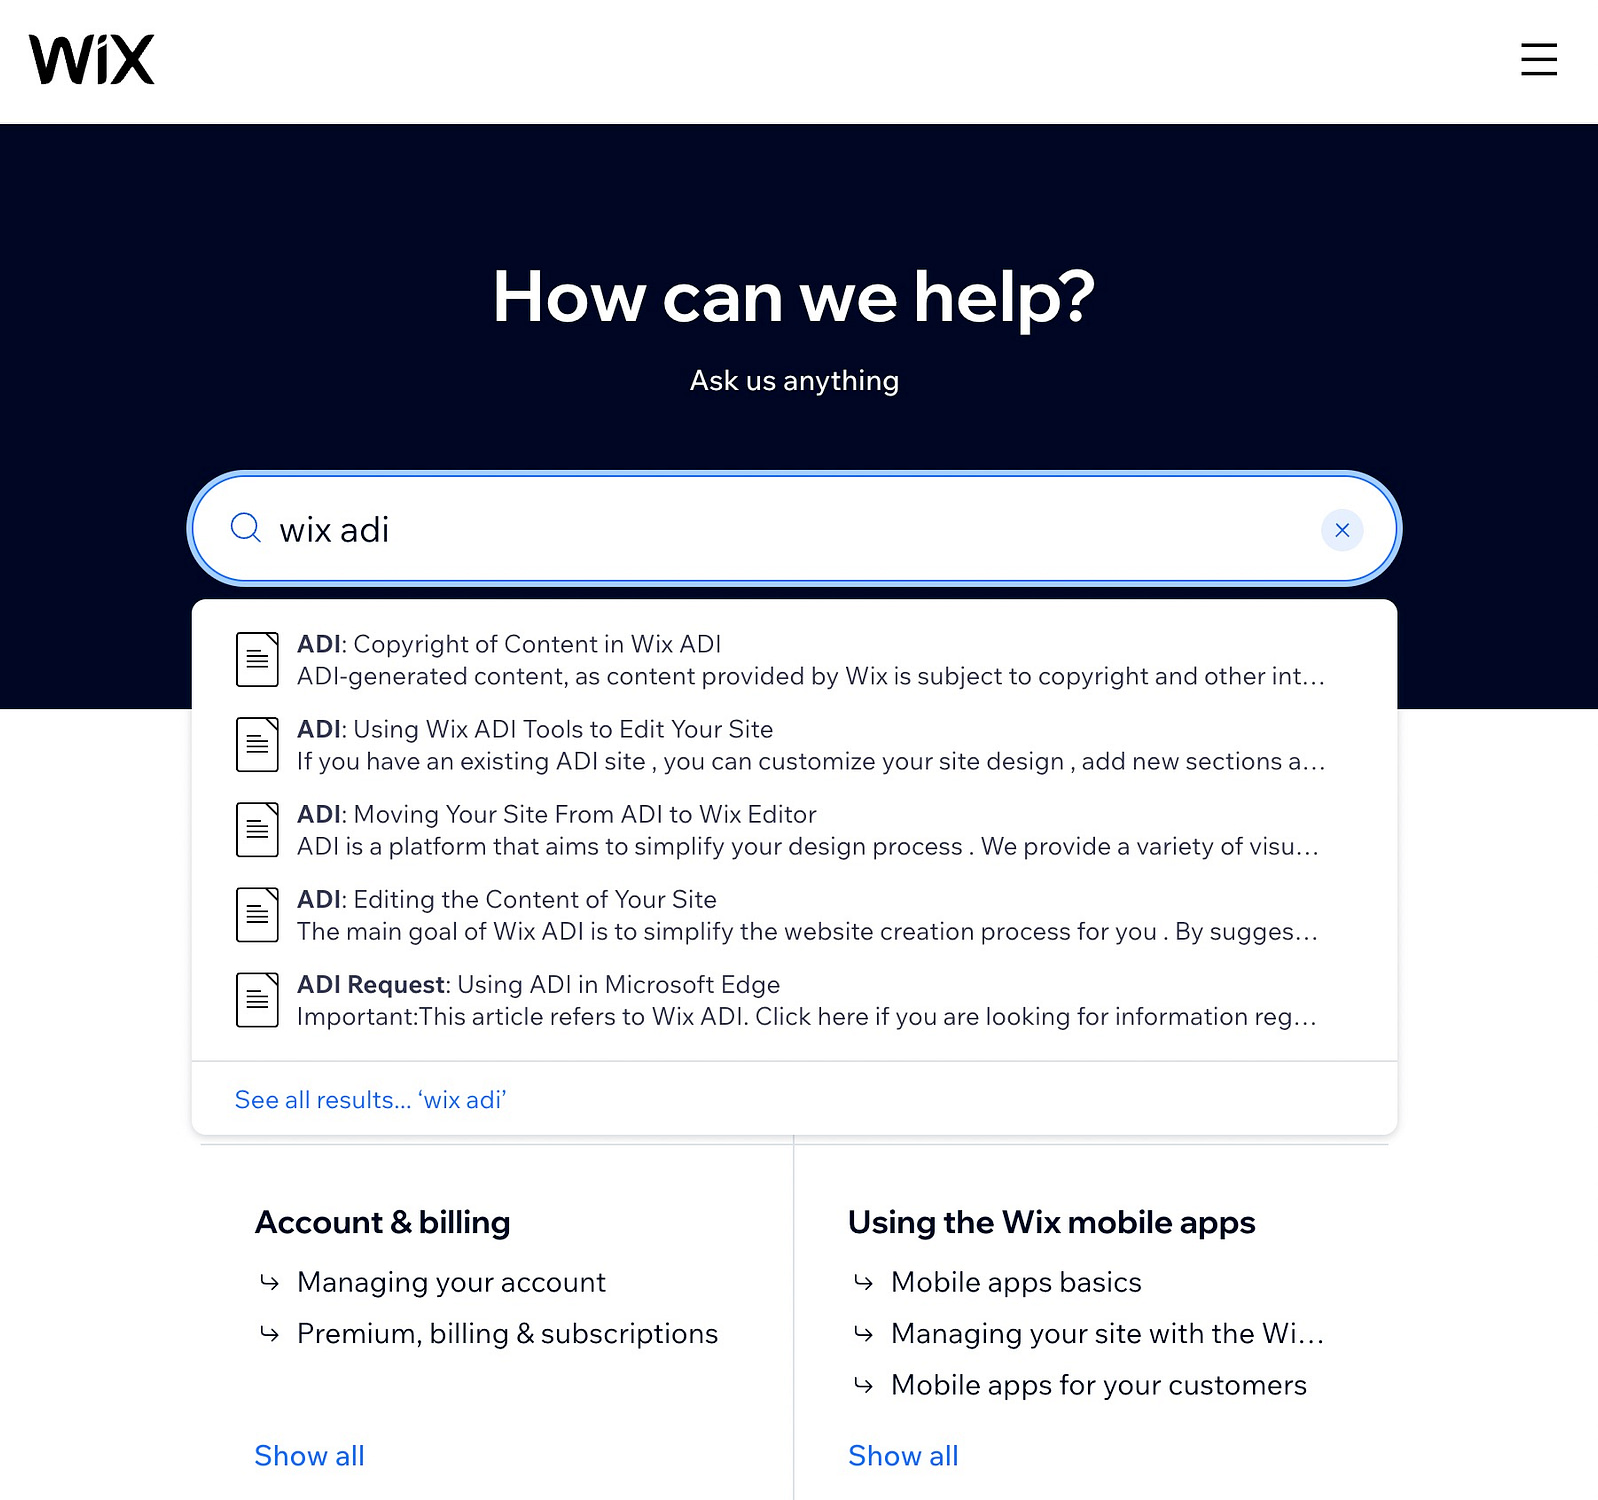 Wix ADI review of the support channels.